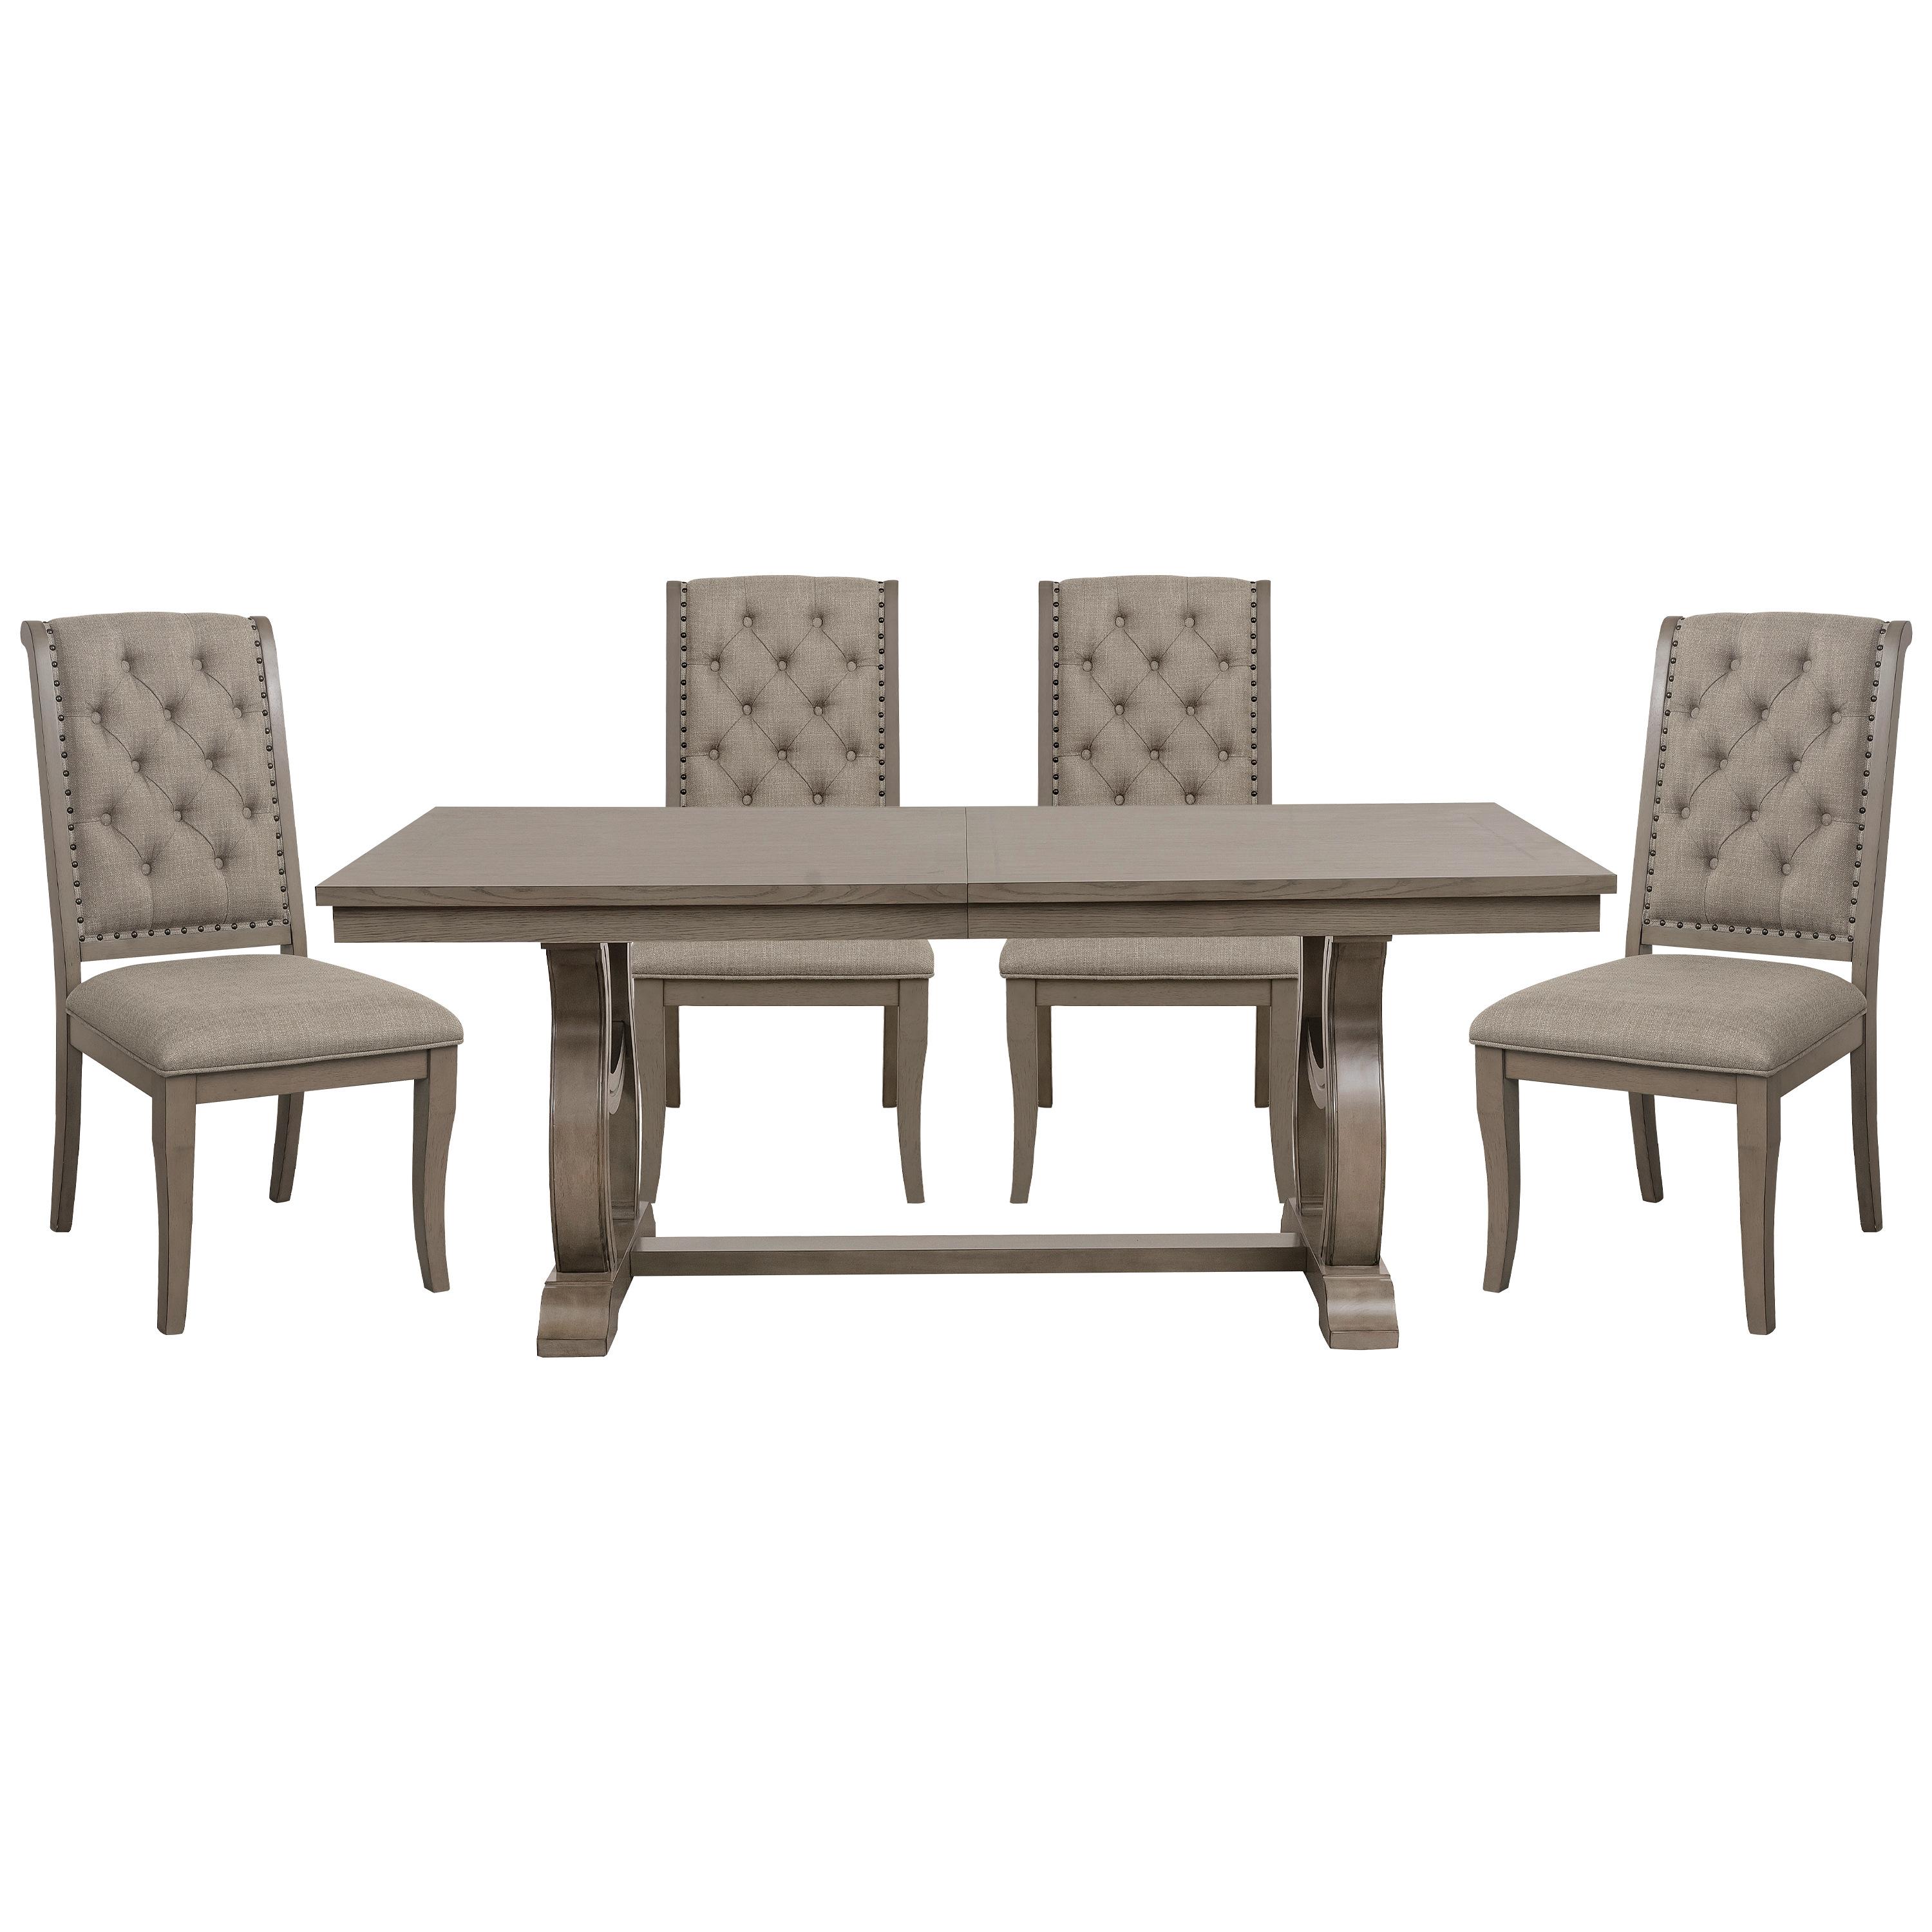 Traditional Dining Room Set 5442-96*5PC Vermillion 5442-96*5PC in Gray Polyester